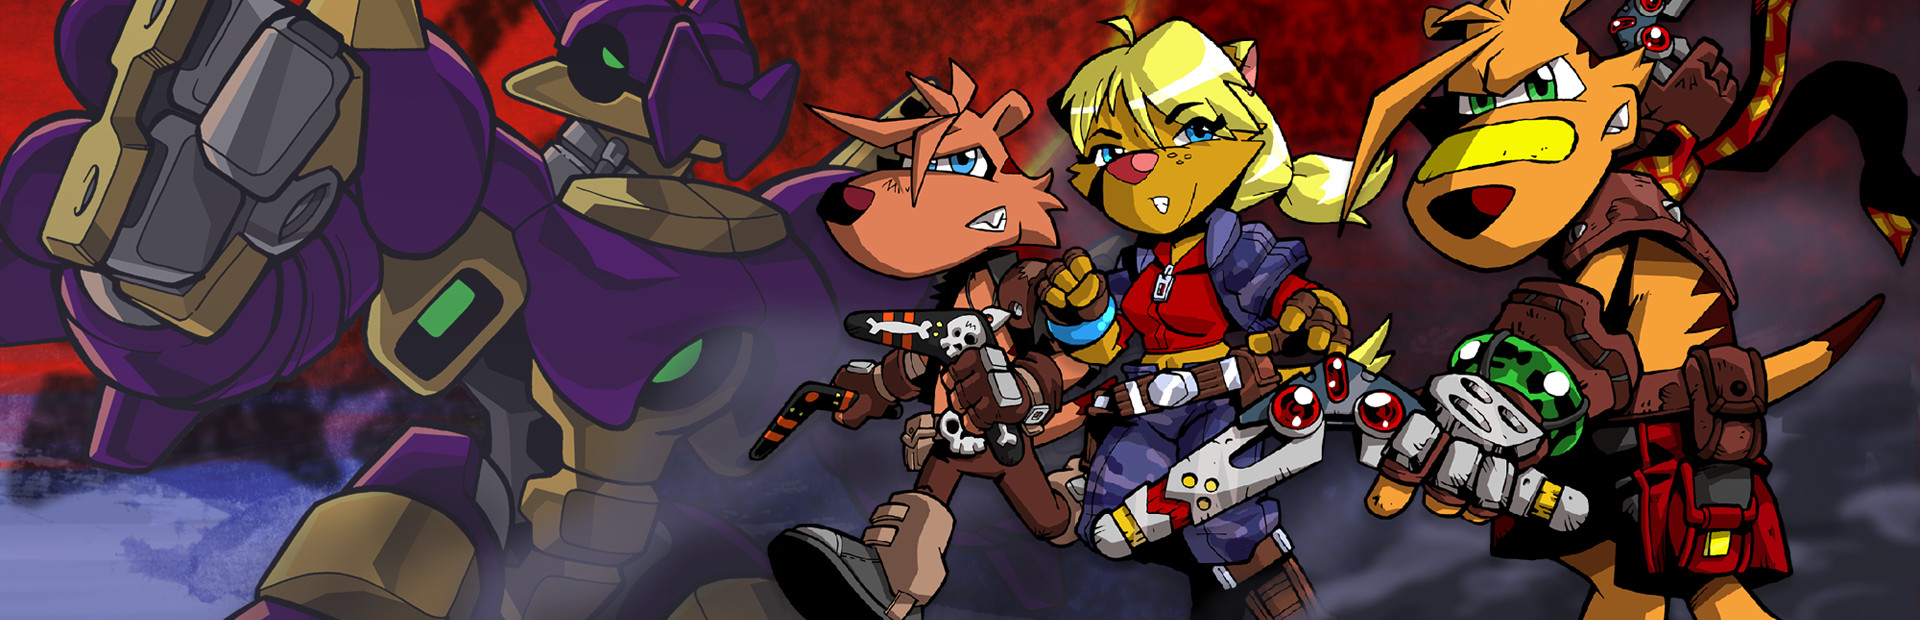 TY the Tasmanian Tiger 3 cover image